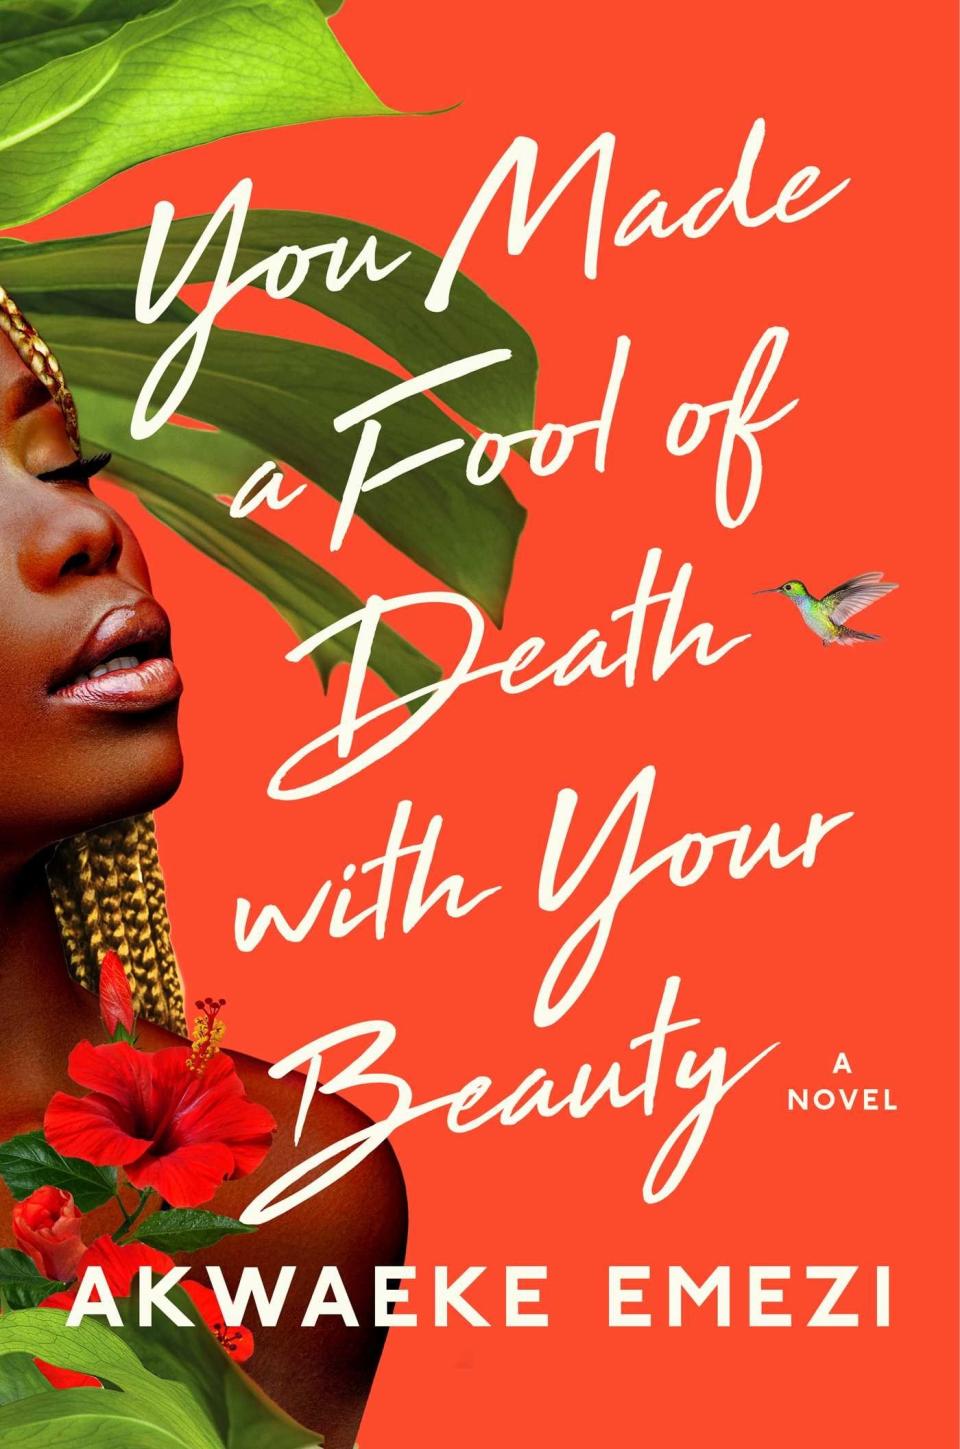 Release date: May 24What it's about: Five years after the death of her husband, Feyi is still in mourning, but she'd like not to be. And so she finds the perfect guy to break her back into dating and sex, but she isn't prepared for the way things spiral from her introduction to his friend group. From there, it's a blink until she's spending the summer at the the island home of a wealthy celebrity chef, and experiencing sizzling and forbidden chemistry with a man (who is, like Feyi, bisexual) who both makes her feel alive and respects her connection to the dead. But with no easy path forward for them, they'll both have to consider what they're prepared to sacrifice for an uncertain romantic future. Emezi once again absolutely slays a new-for-them genre, with tenderhearted characters and an immaculate balance of realistic dialogue and lyrical prose.Get it from Bookshop or your local bookstore via Indiebound here.